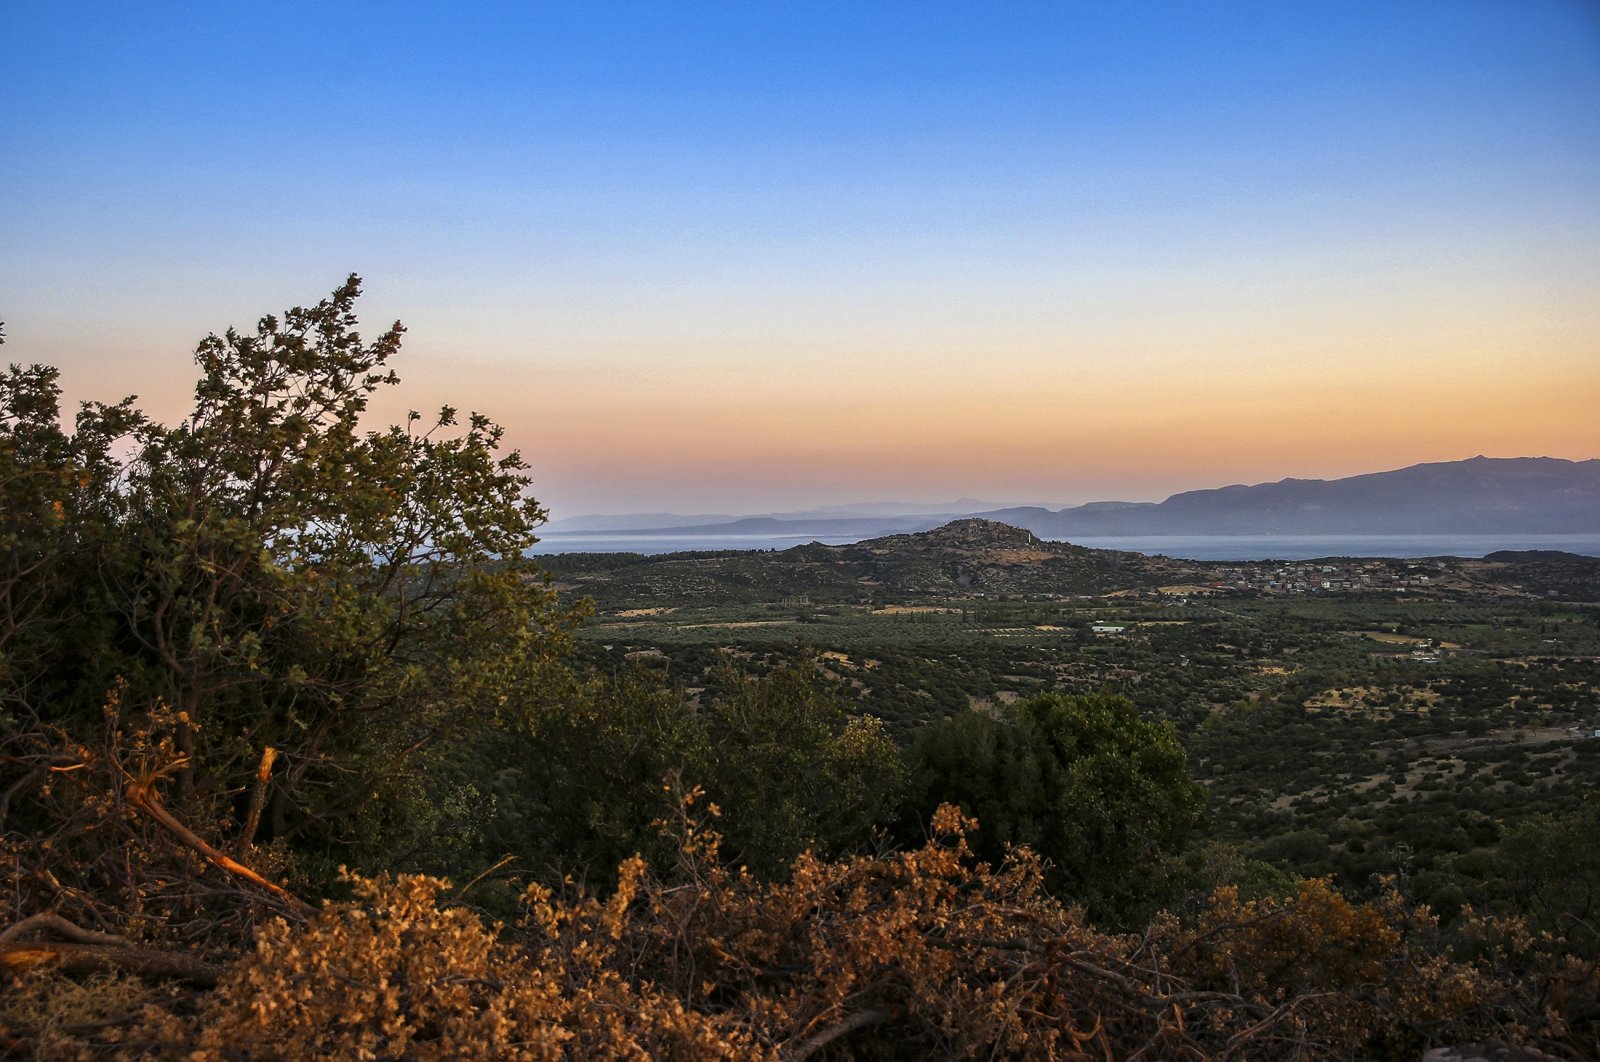 The view villagers will see from their houses at Nefes Assos. (Photo courtesy of Önder Halisdemir/Nefes Assos)